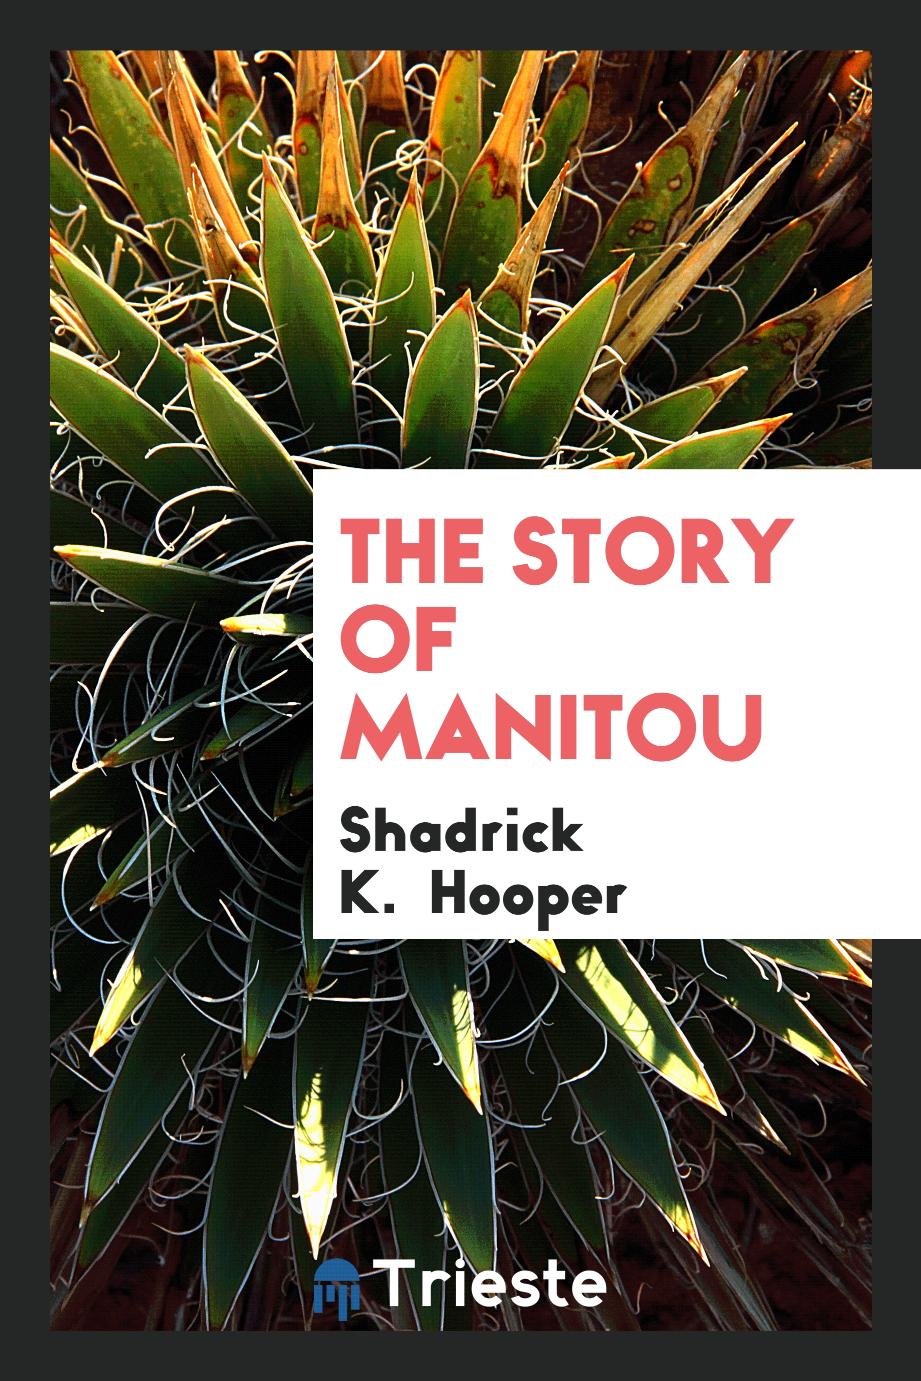 The Story of Manitou